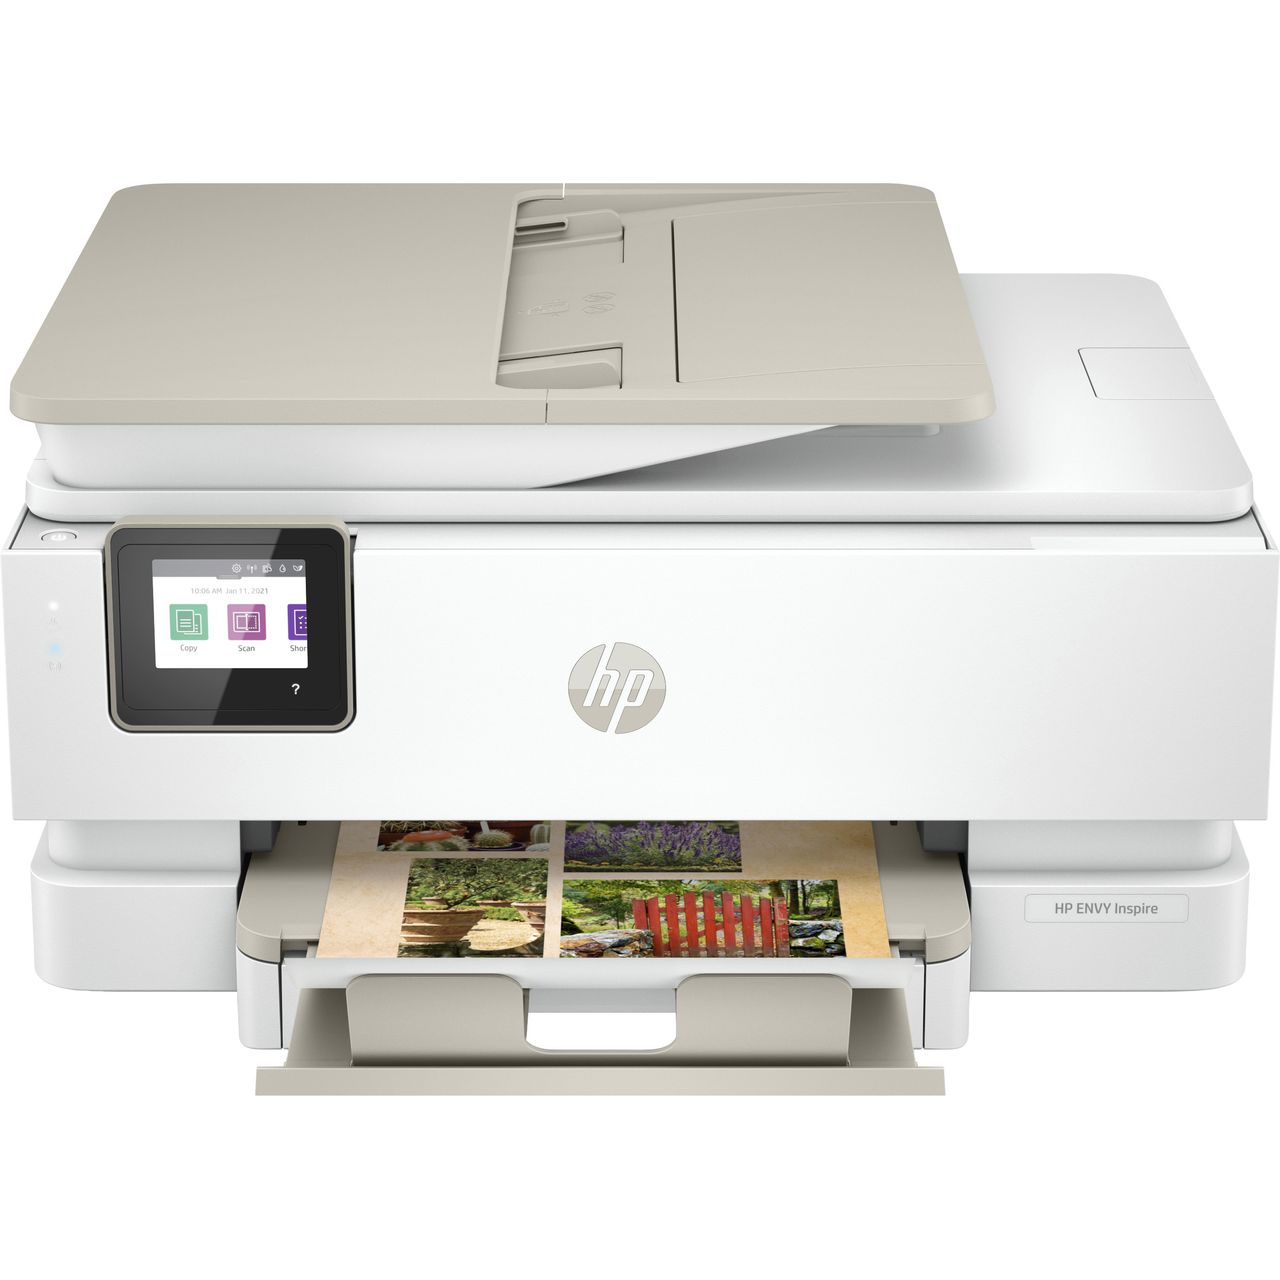 HP ENVY Inspire 7920e All-in-One Inkjet Printer Includes 6 months of Instant Ink with HP PLUS - White